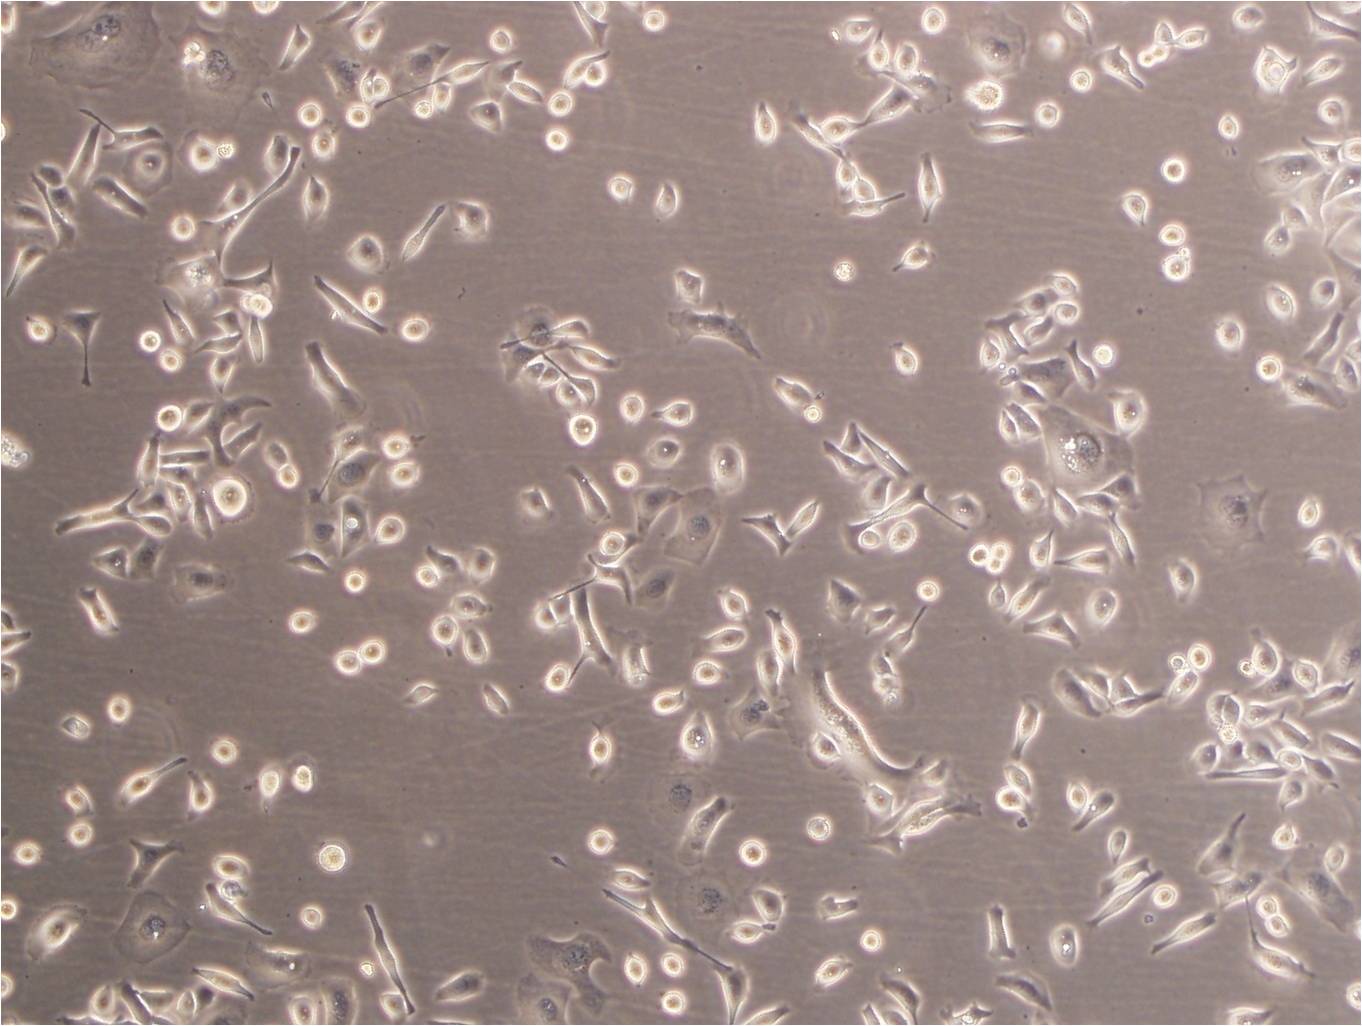 SK-GT-2 epithelioid cells人胃癌细胞系,SK-GT-2 epithelioid cells